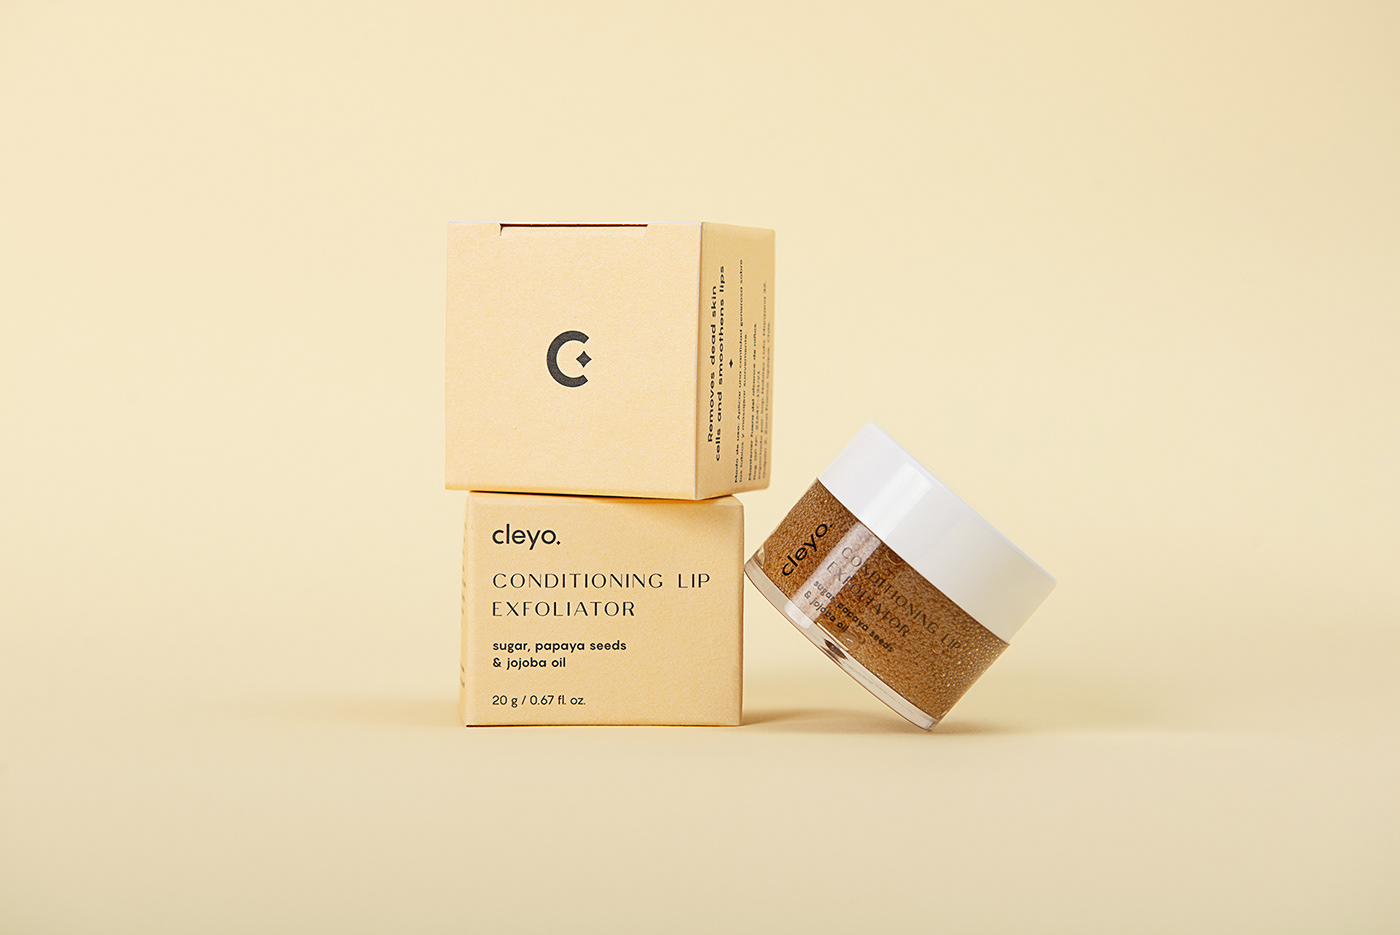 Cleyo Skincare Brand Identity and Packaging Design